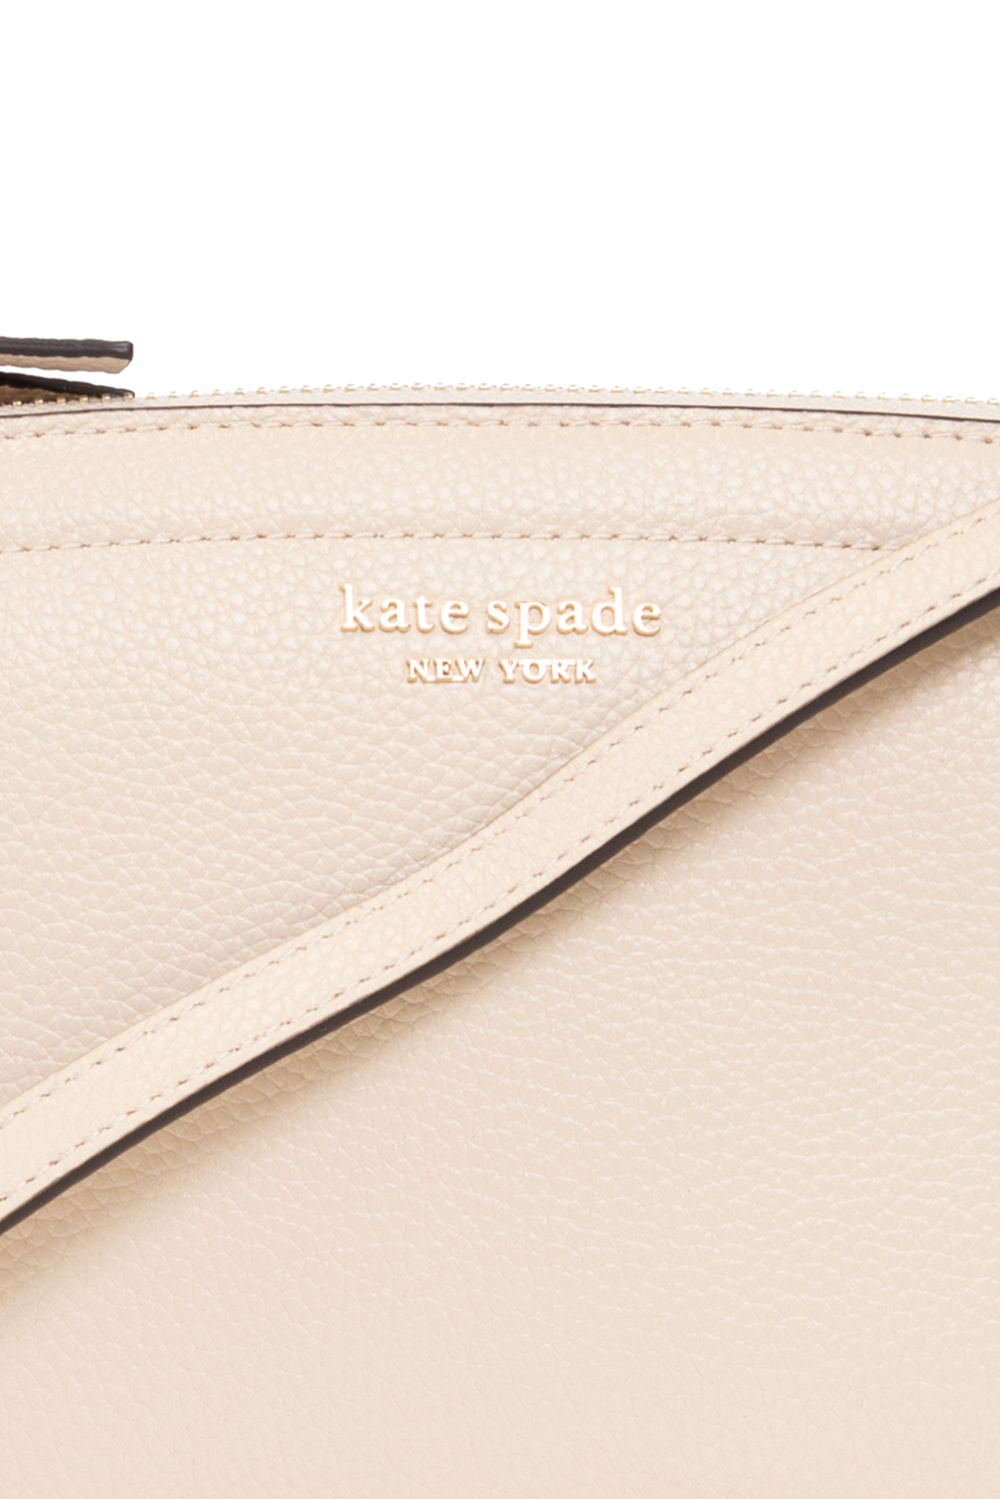 Kate Spade ‘Knott Small’ shoulder another bag